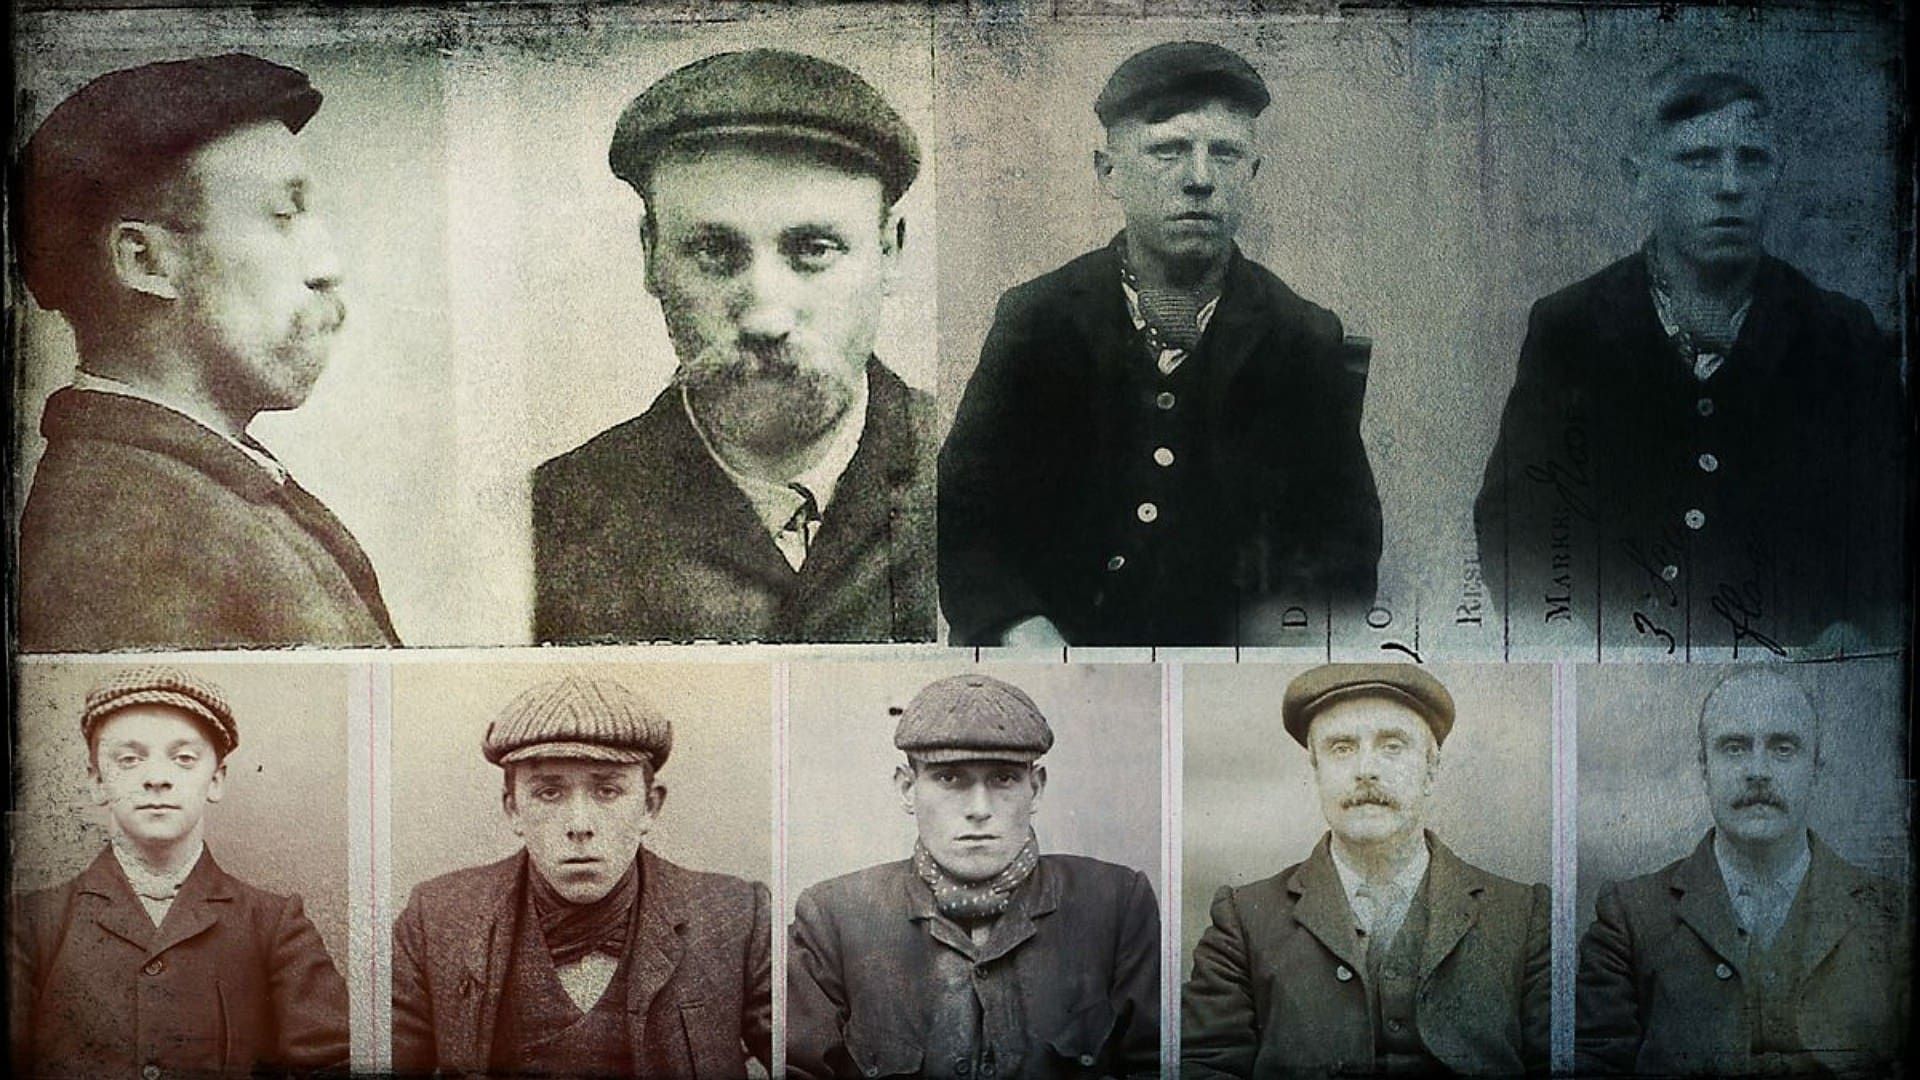 The Real Peaky Blinders background